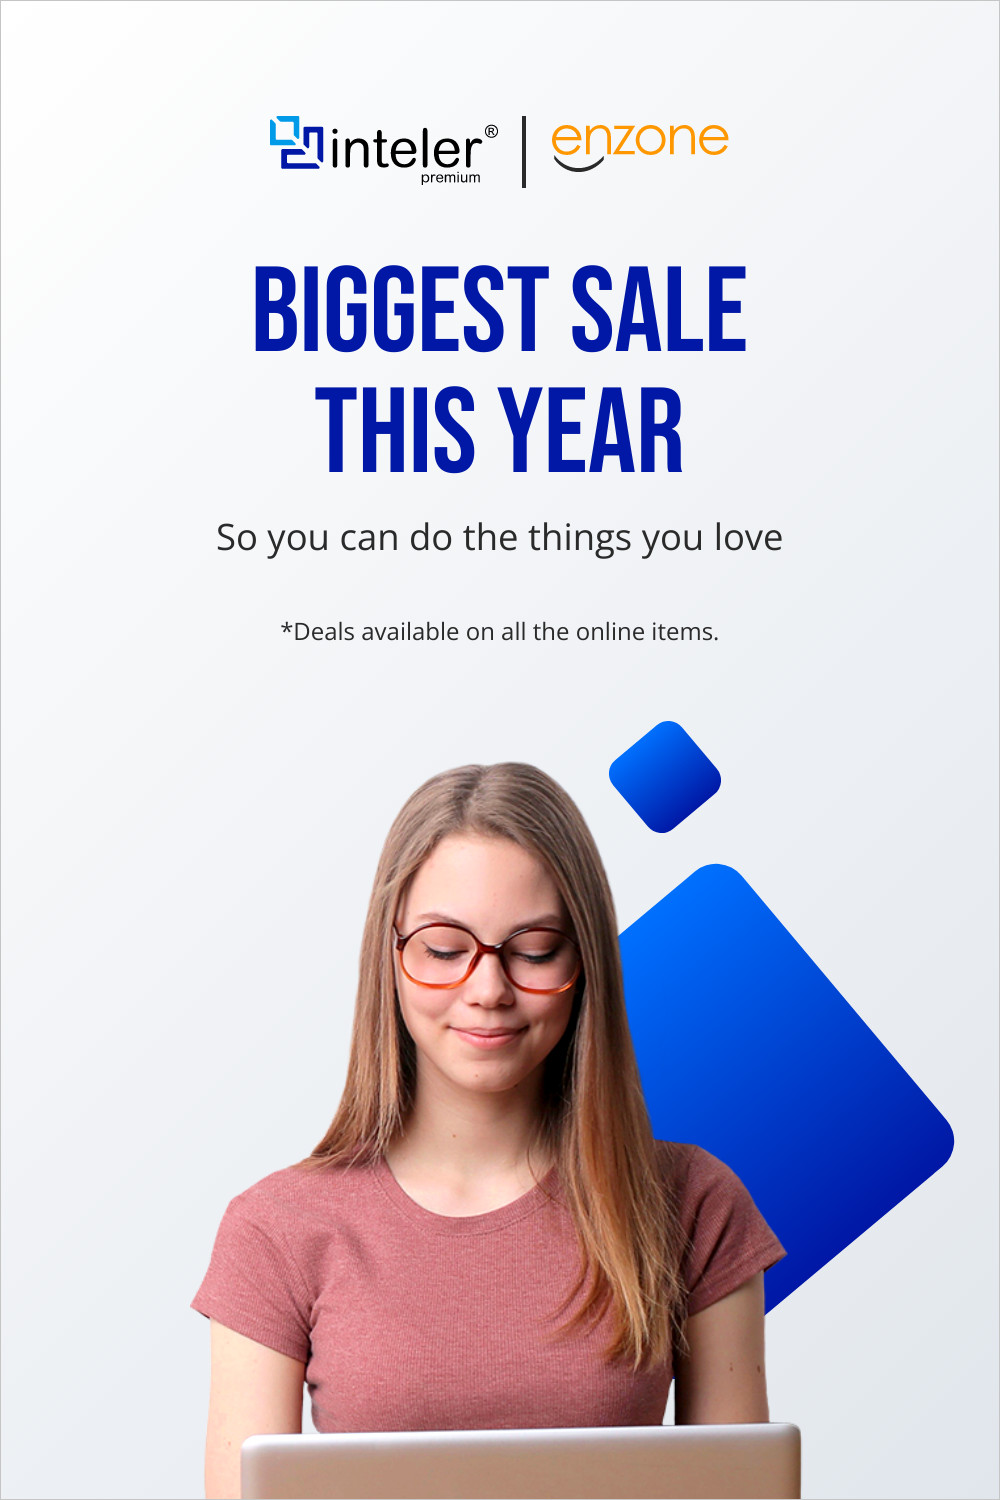 Biggest Software Sale This Year  Inline Rectangle 300x250